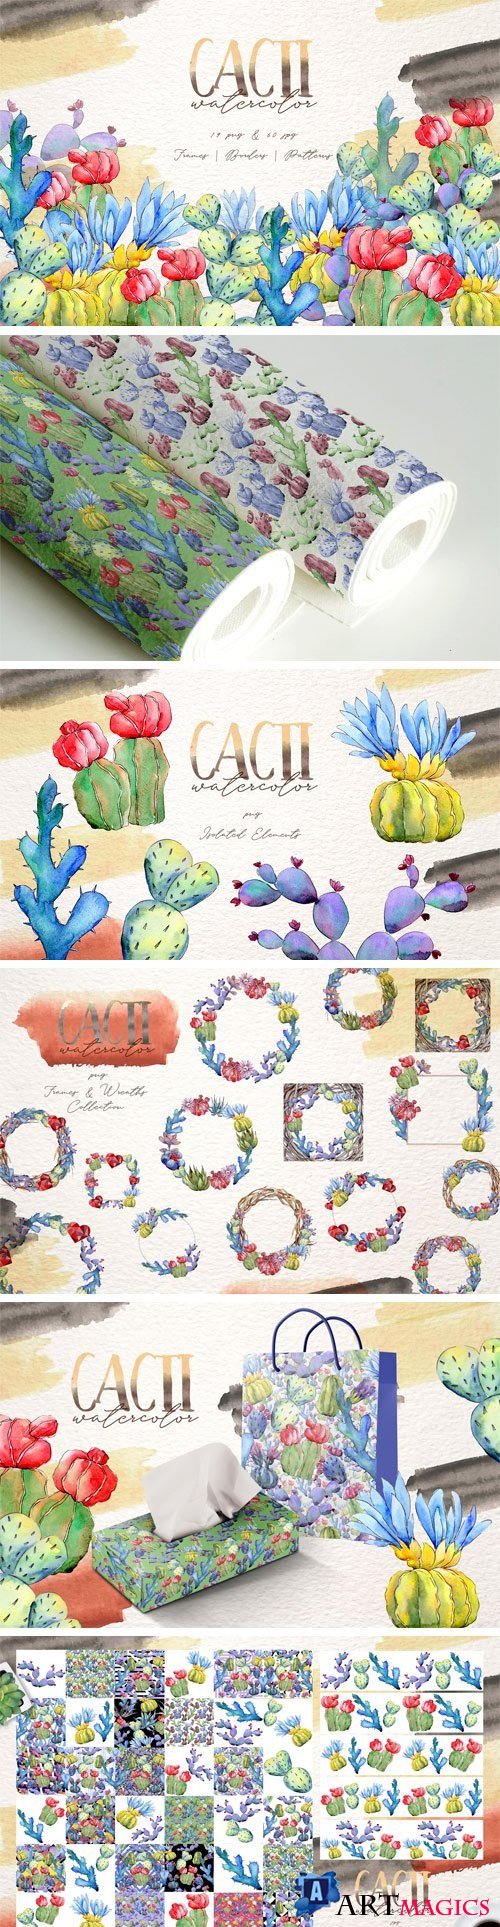 Cool colorful cacti PNG watercolor - 3087941